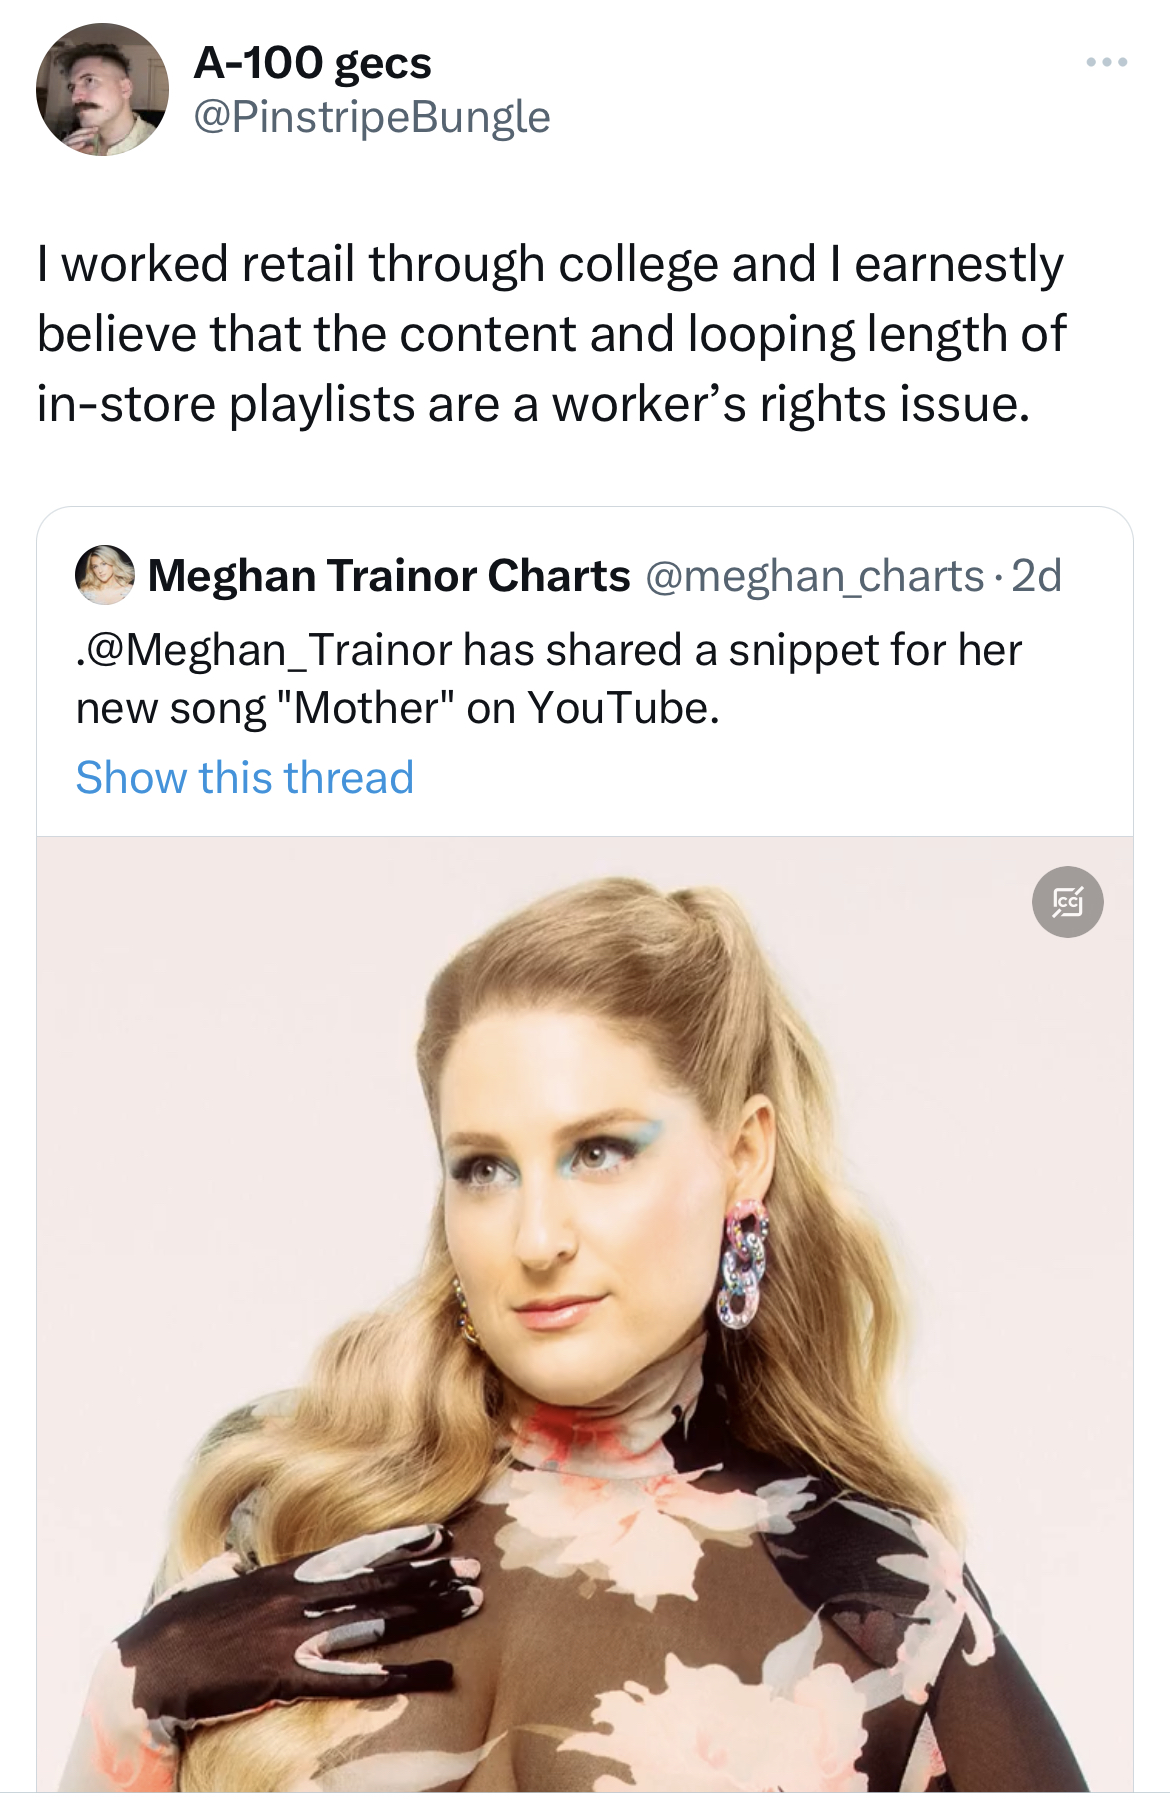 tweets roasting celebs - meghan trainor see through - A100 gecs I worked retail through college and I earnestly believe that the content and looping length of instore playlists are a worker's rights issue. Meghan Trainor Charts . Trainor has d a snippet f